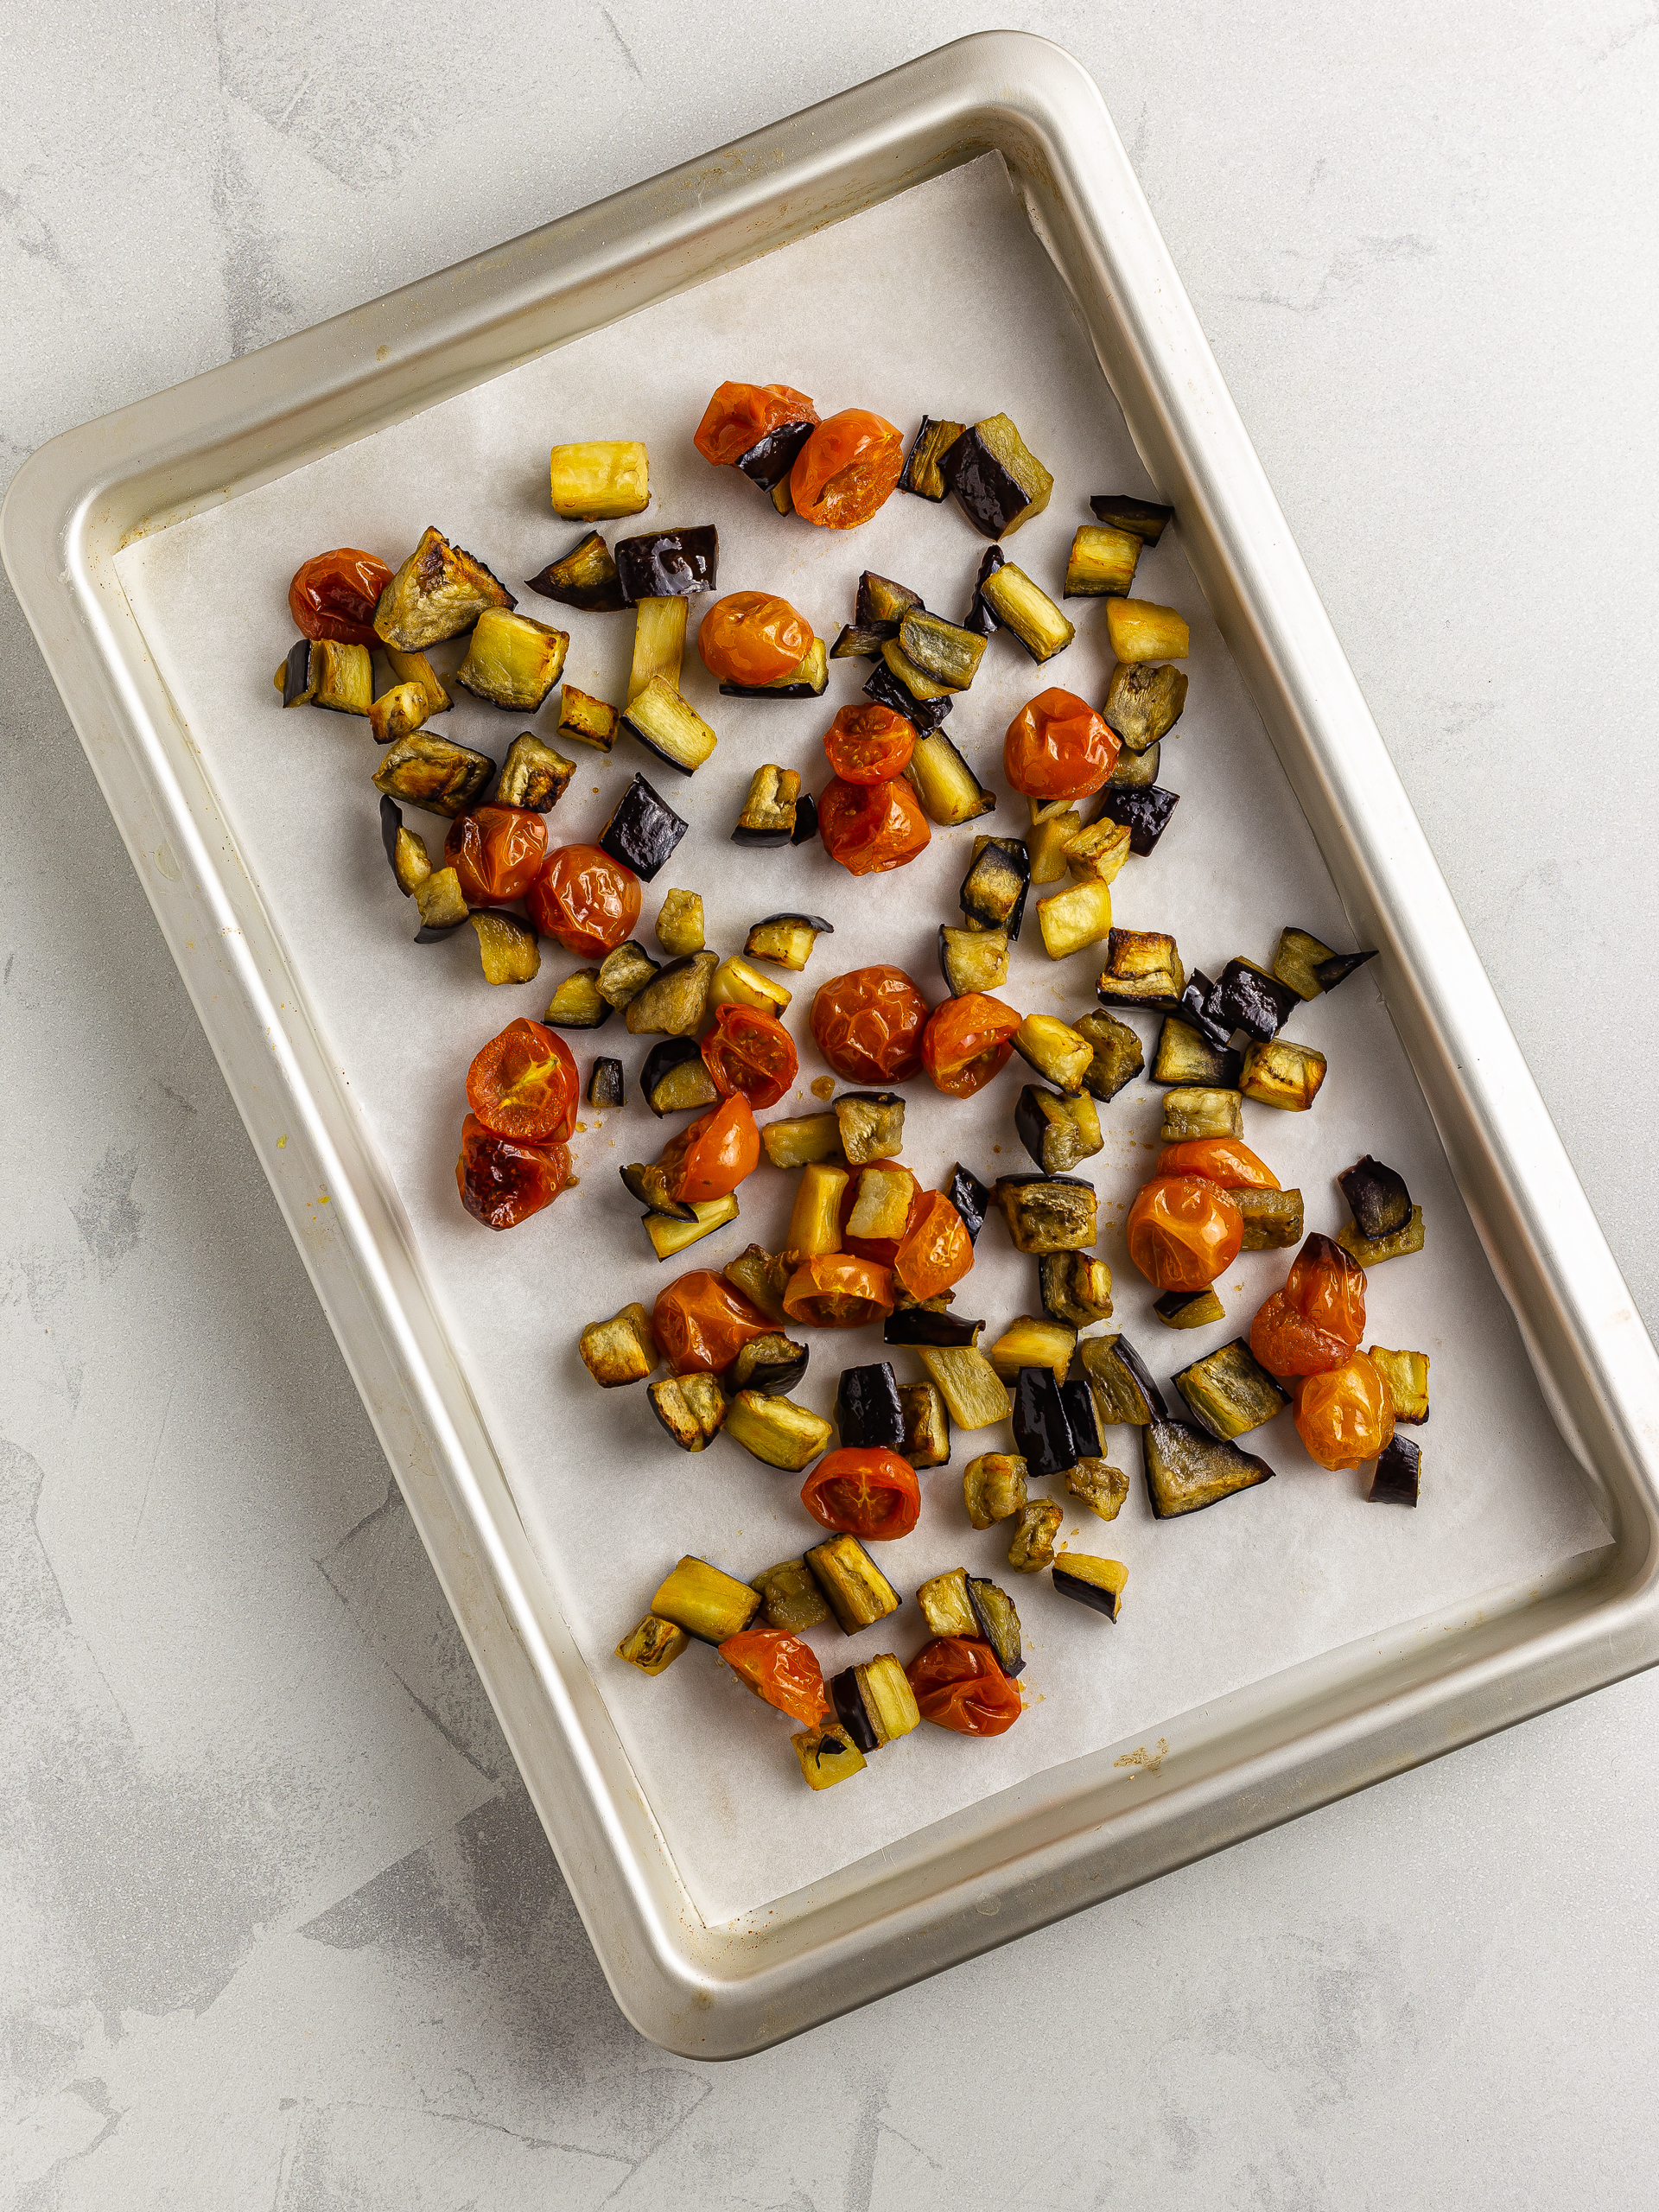 roasted tomatoes and aubergines